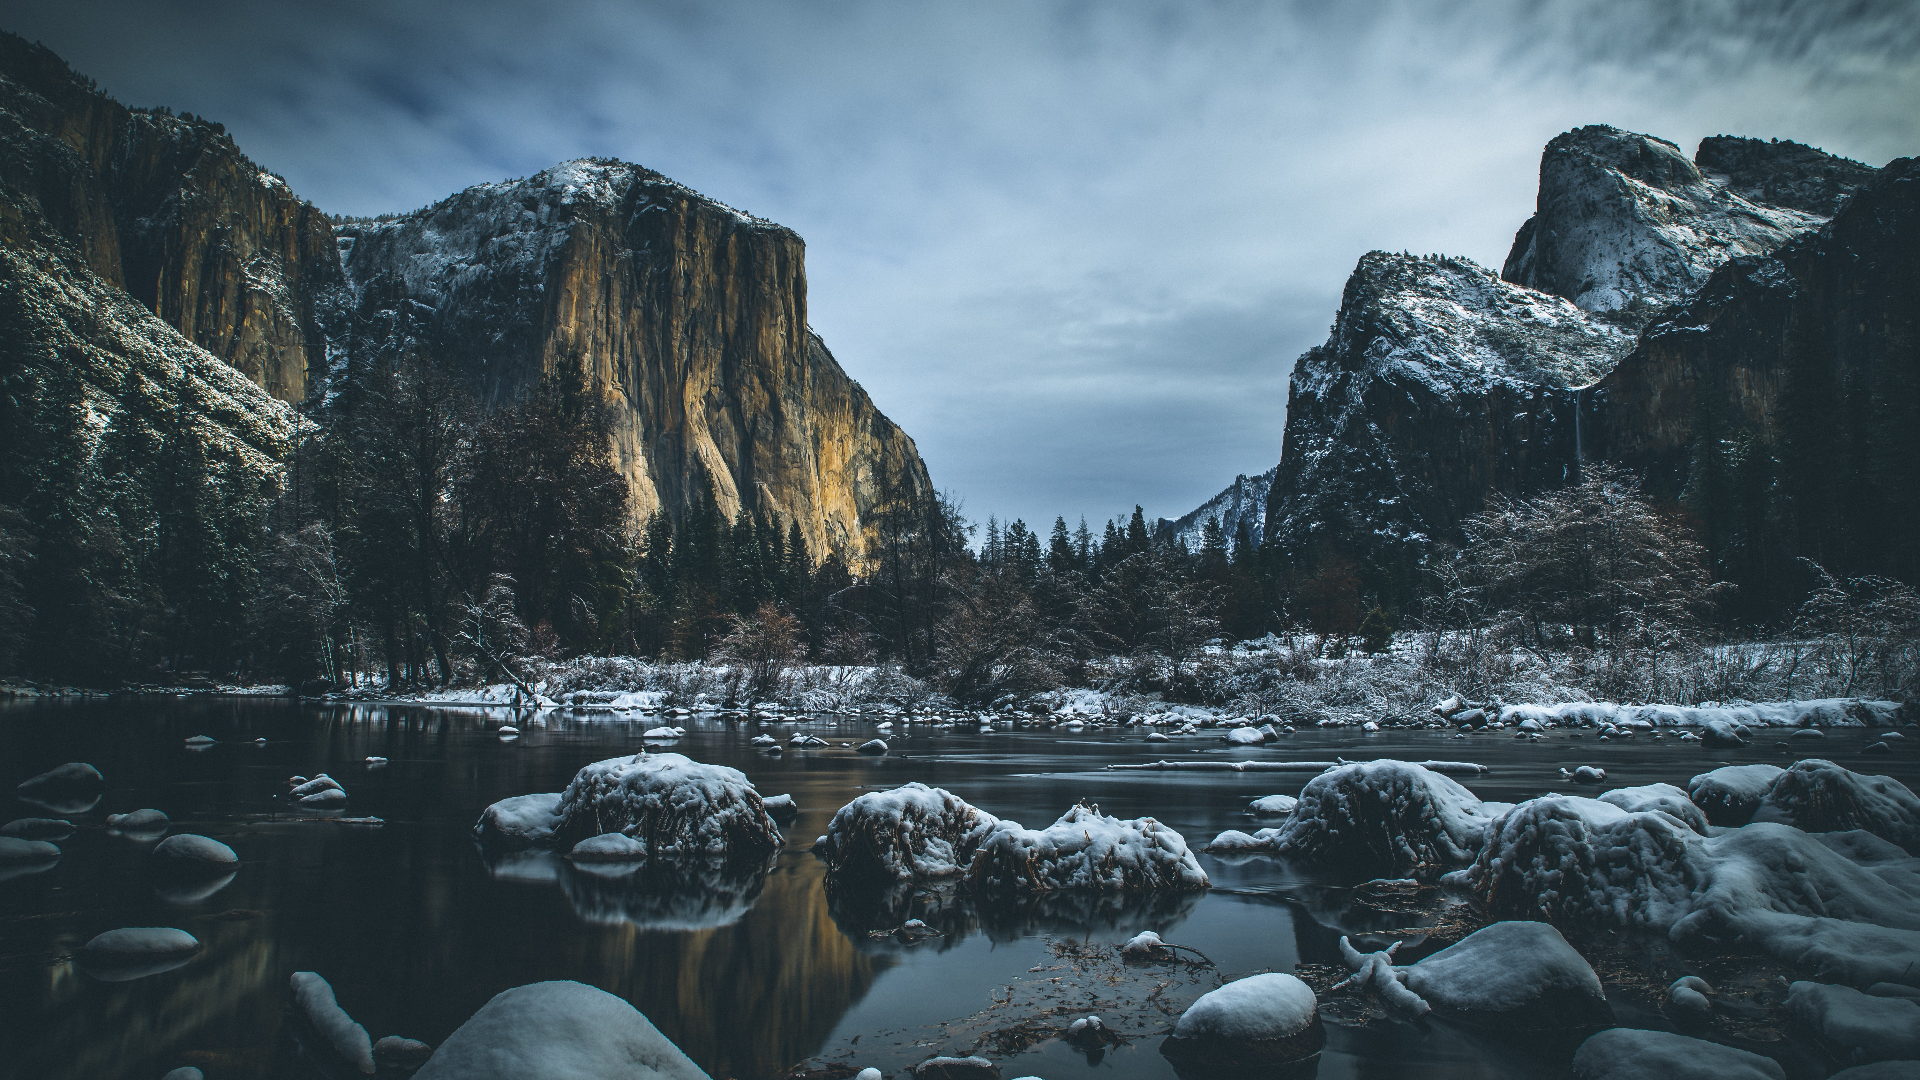 Nature Landscape Clouds Winter Mountains Rocks Water Snow Trees Plants Yosemite Valley USA 1920x1080